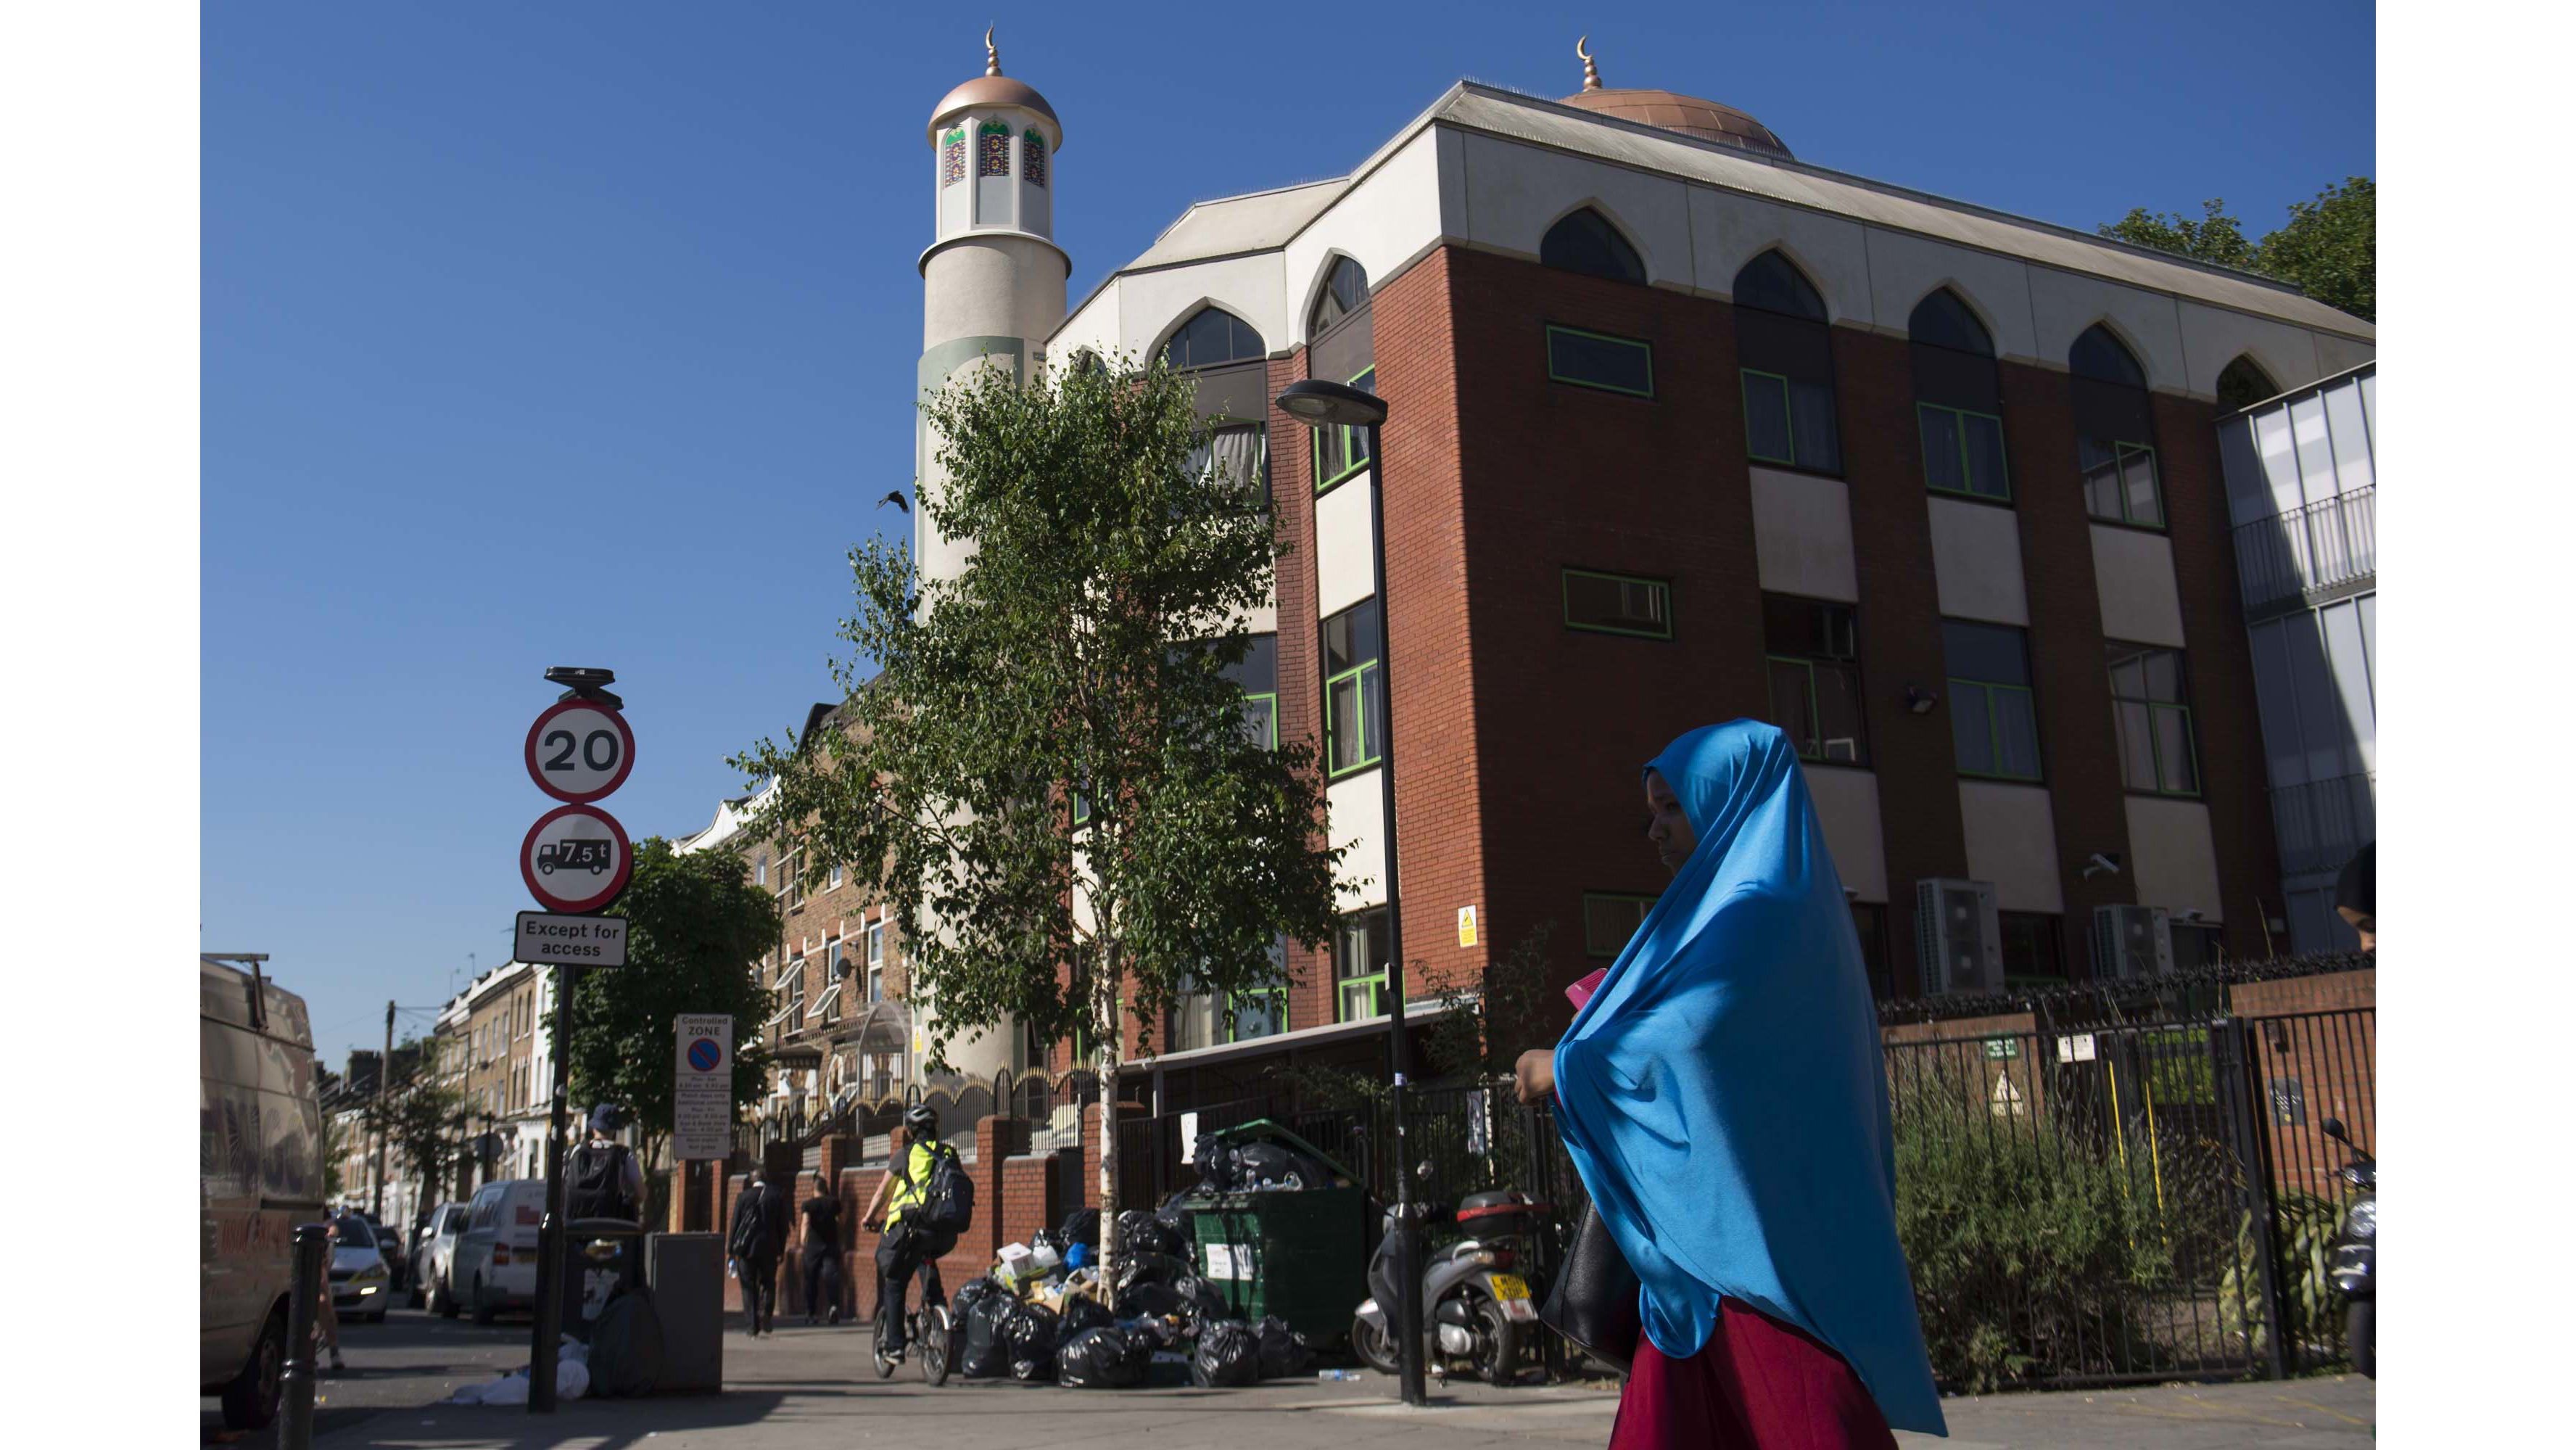 A woman in a blue hijab walks past the five-story red brick Finsbury Park Mosque -- the scene of Monday's attack.